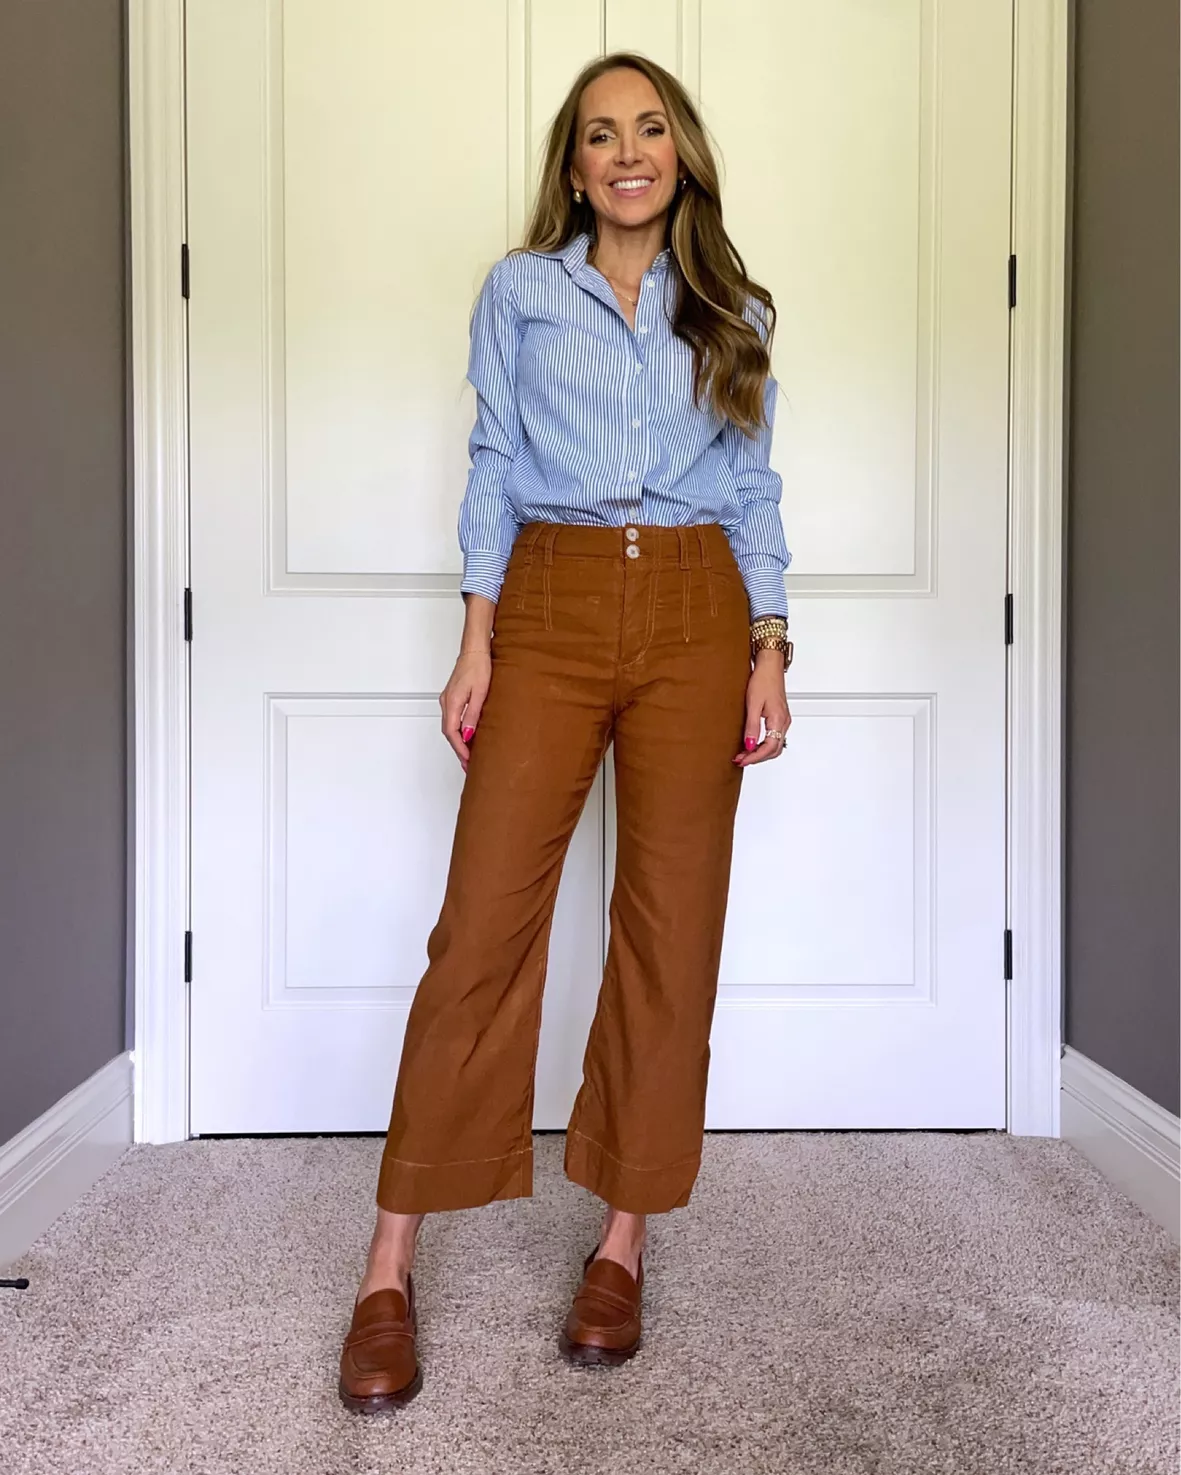 Wide Leg Pants with Platform Loafers Outfits (2 ideas & outfits)